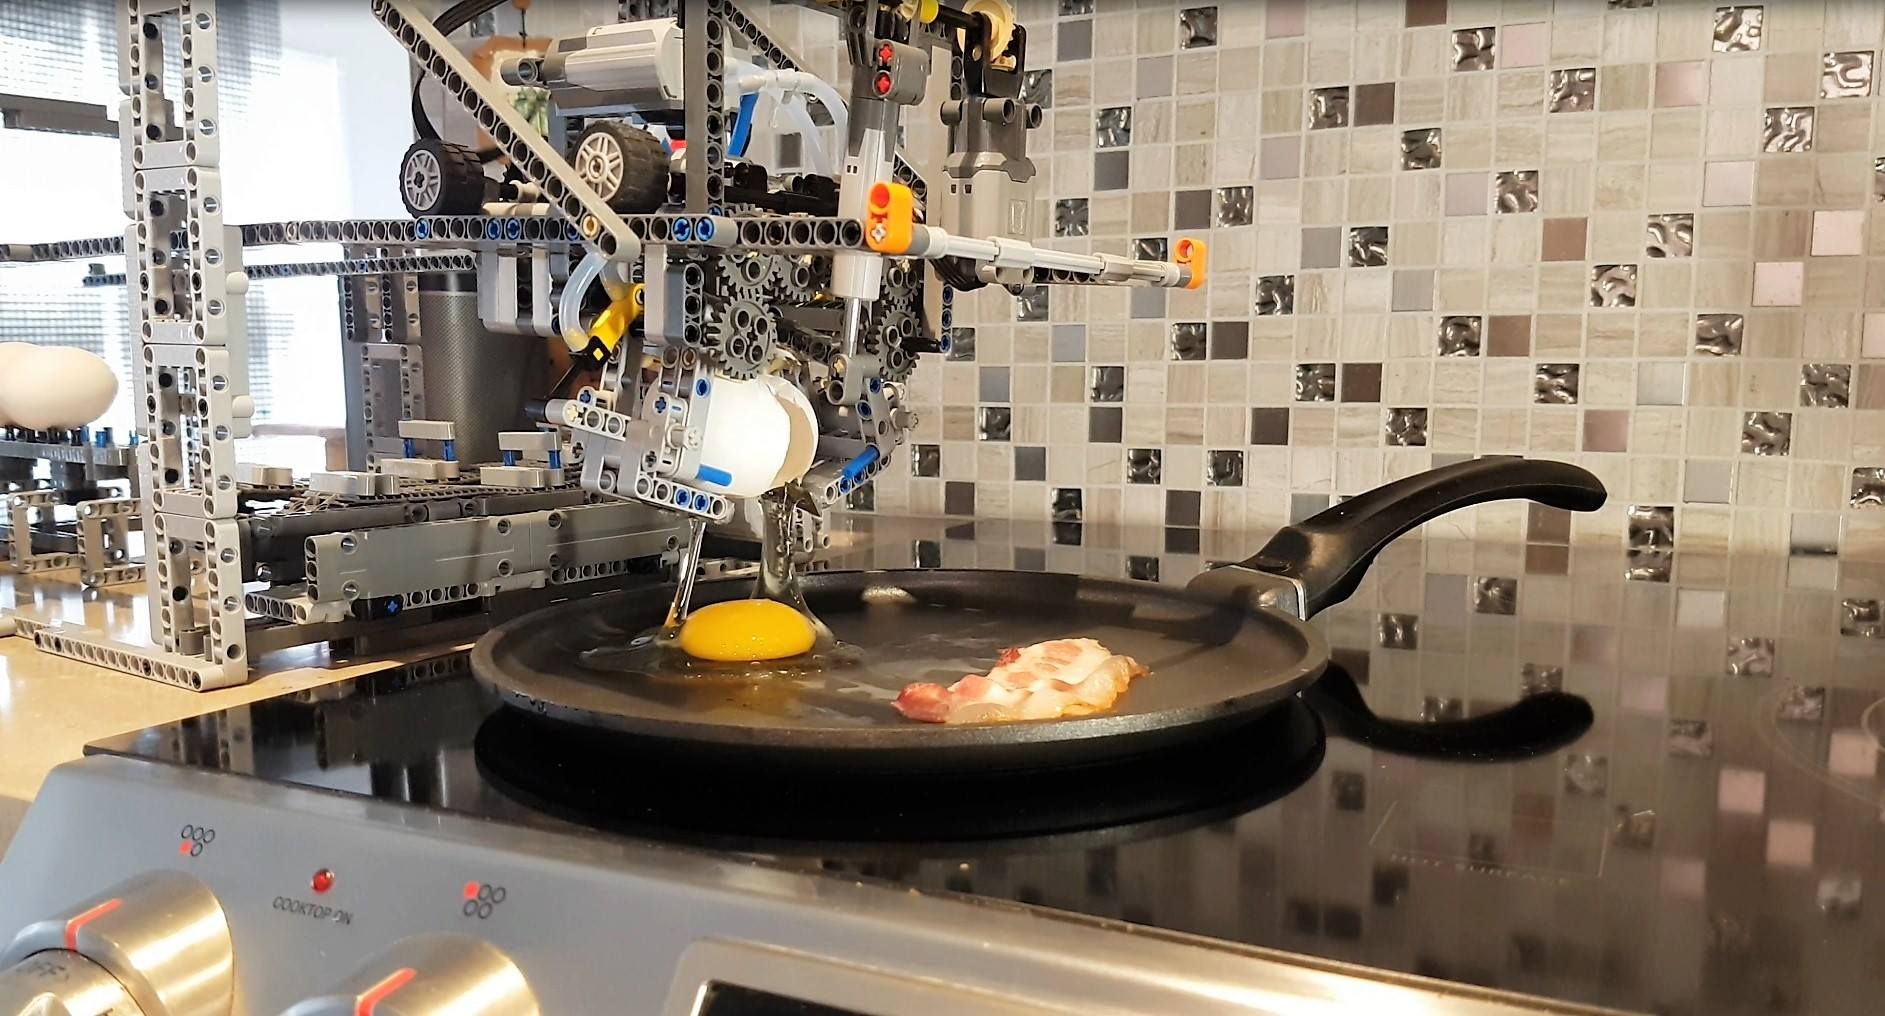 This Lego Breakfast Machine Can Make You Bacon and Eggs